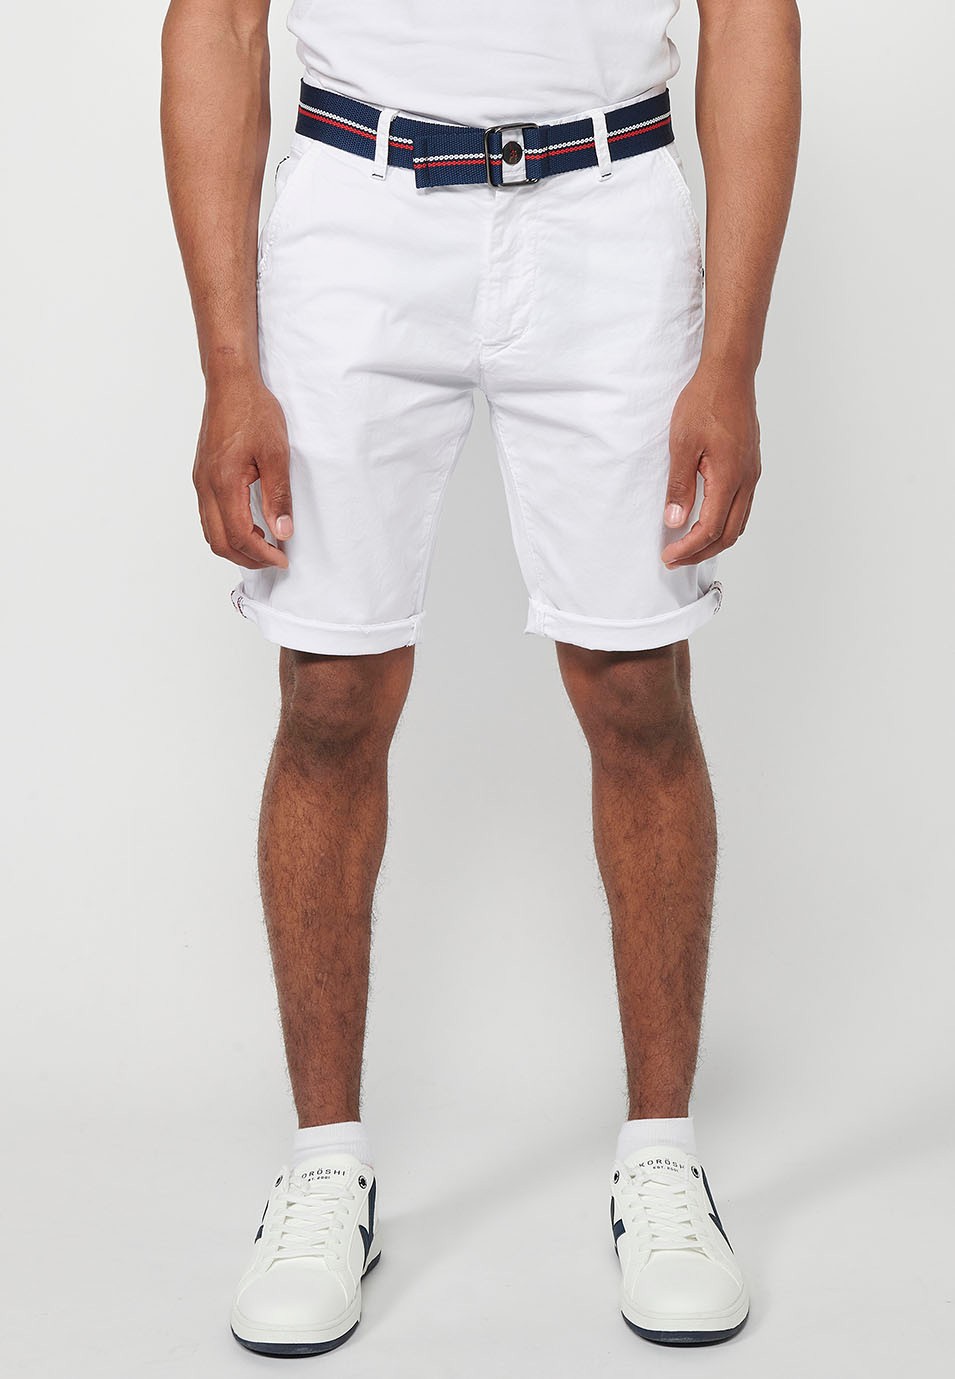 Shorts with a turn-up finish with front closure with zipper and button and belt in White for Men 2